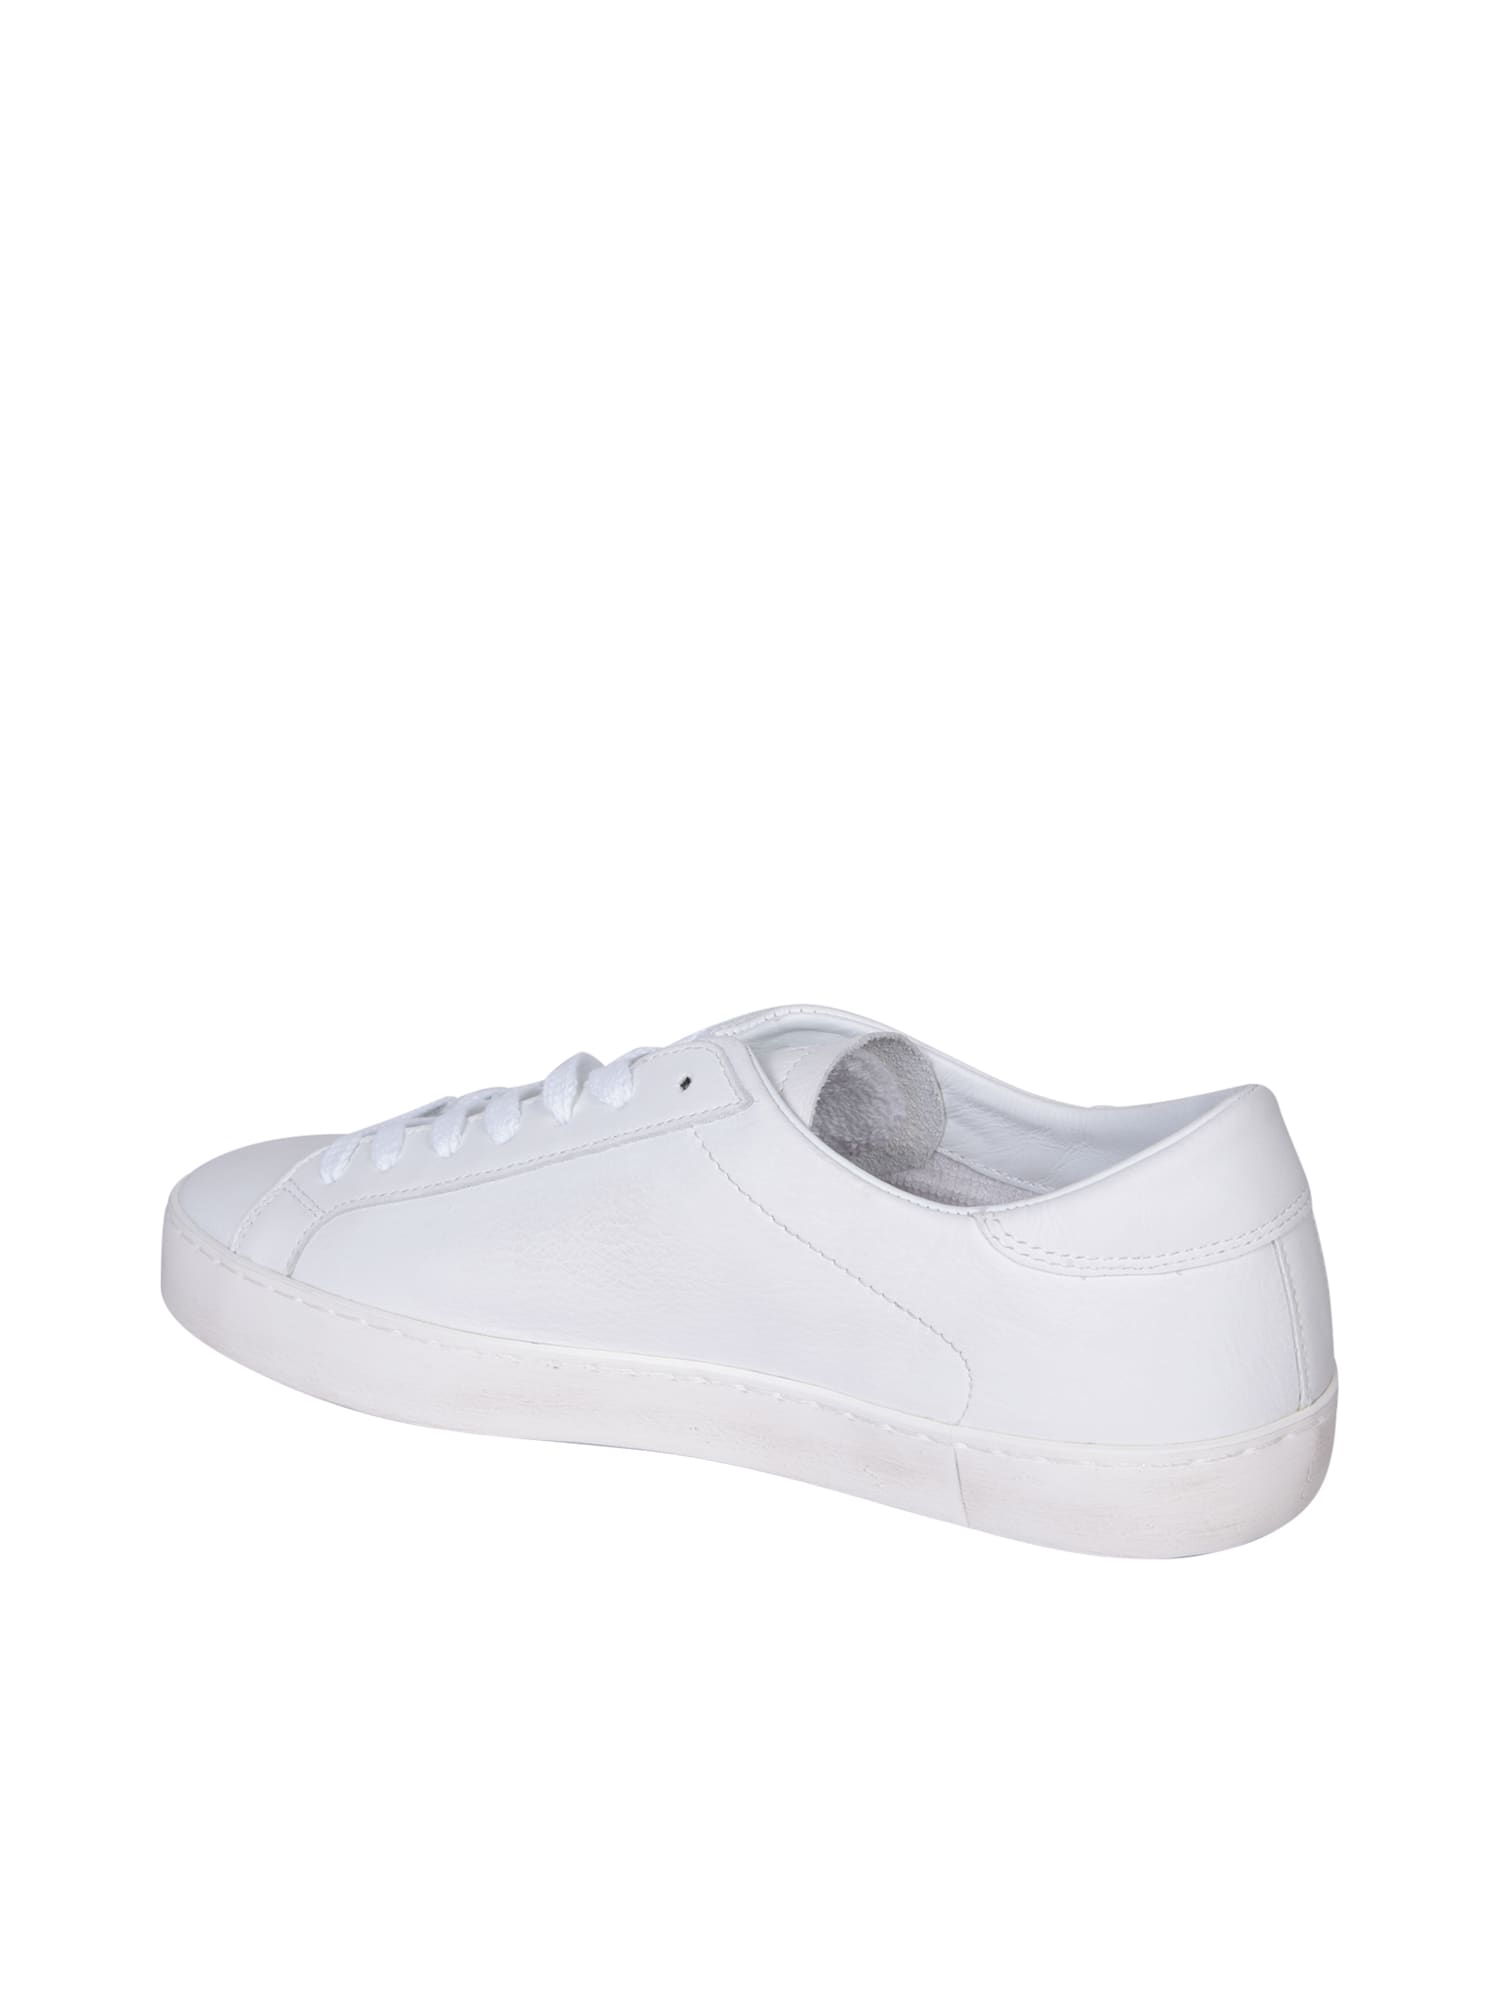 Shop Date Hill Low Calf Leather White Sneakers